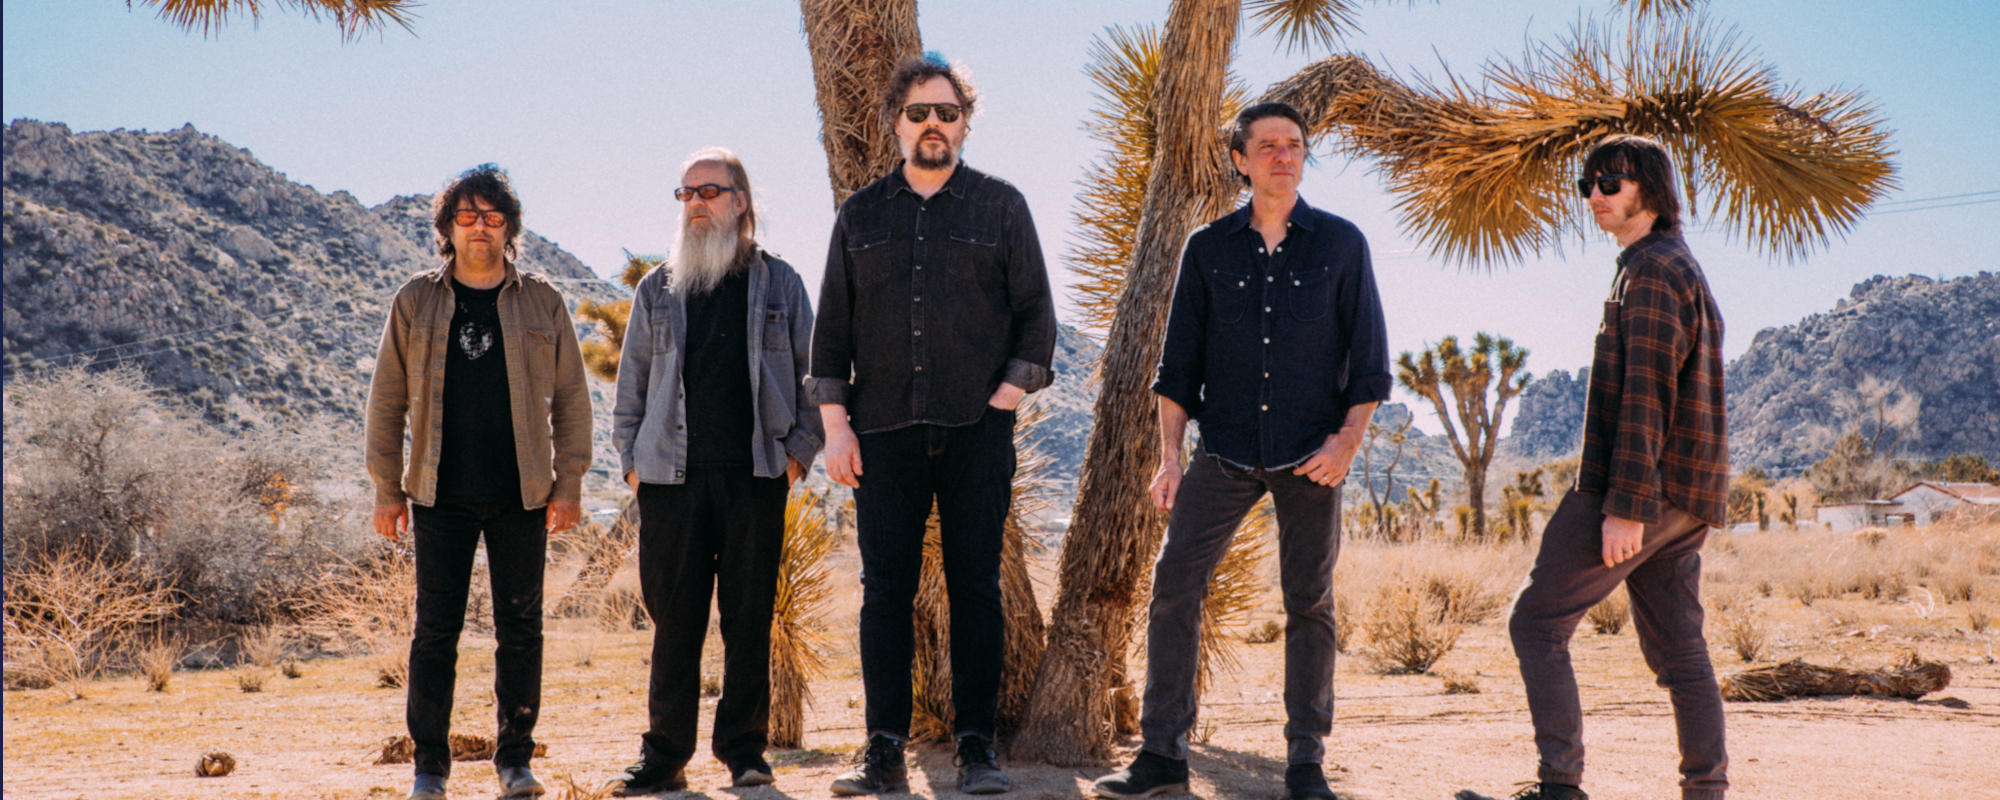 Behind the Apology and Meaning of the Band Name: Drive-By Truckers